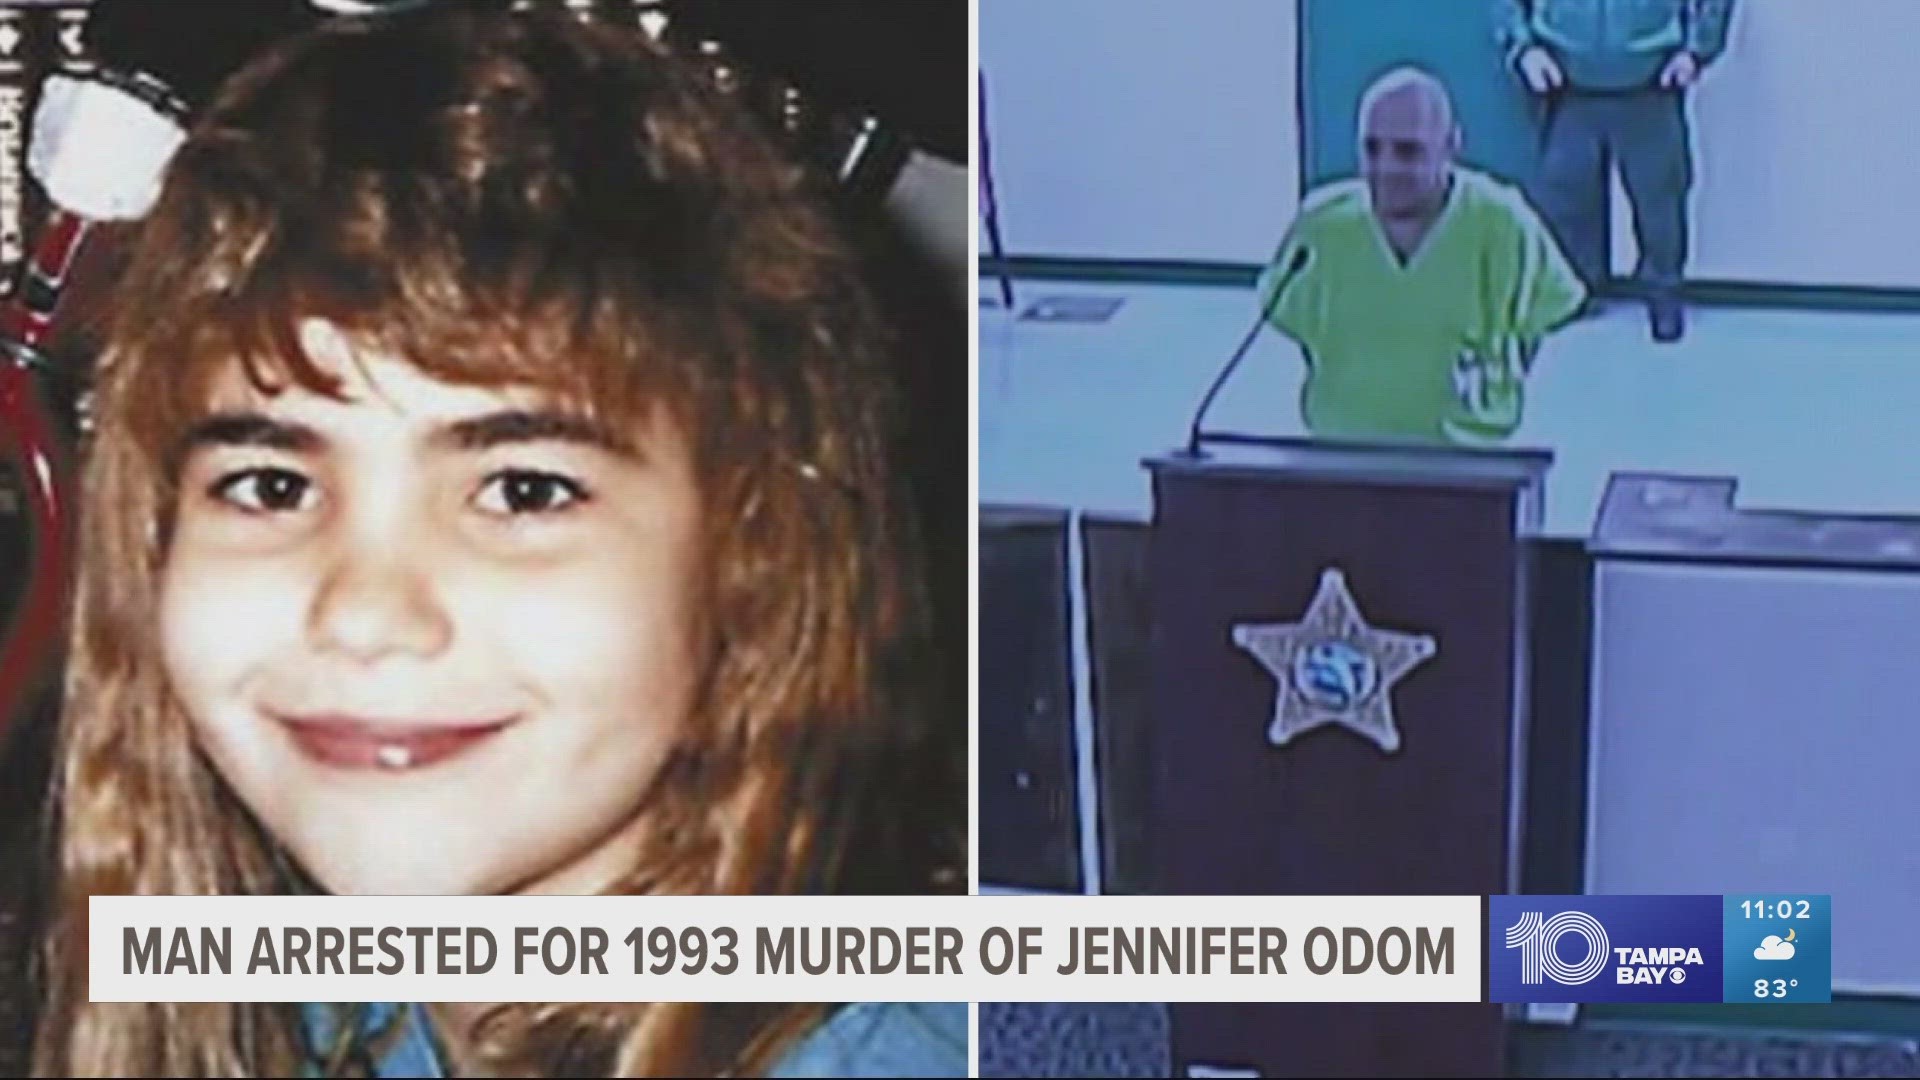 Here's a timeline of what we know about the death of Jennifer Odom and the eventual arrest of Jeffrey Crum.